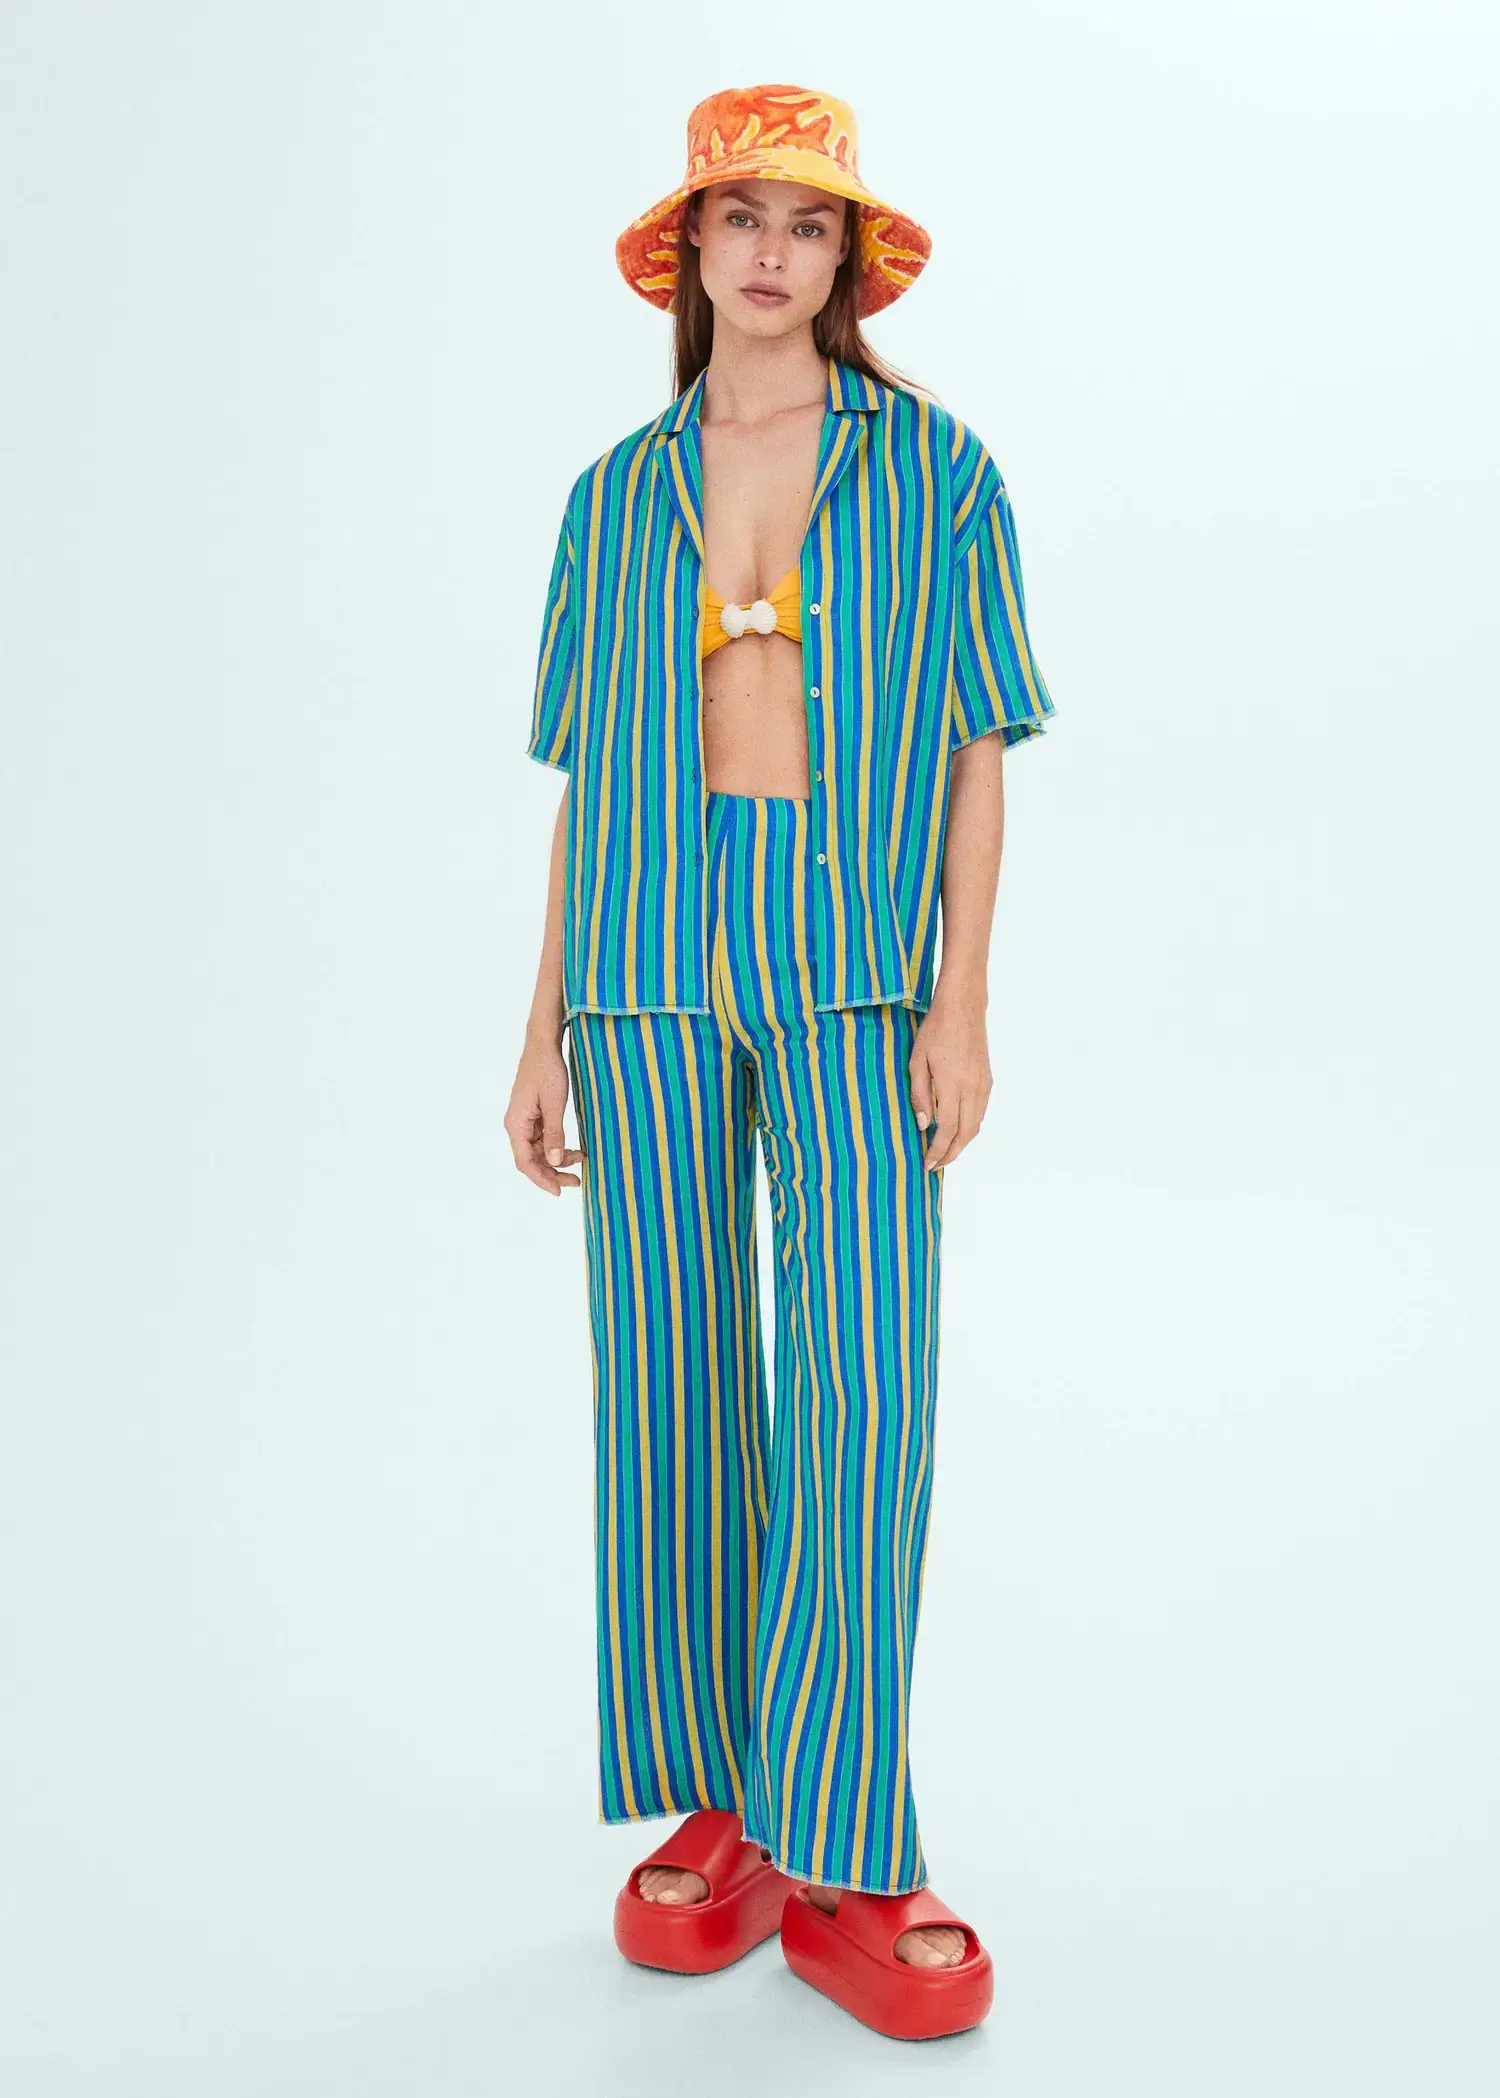 Mango Multi-colored striped linen pants. a woman in a blue and yellow striped outfit. 